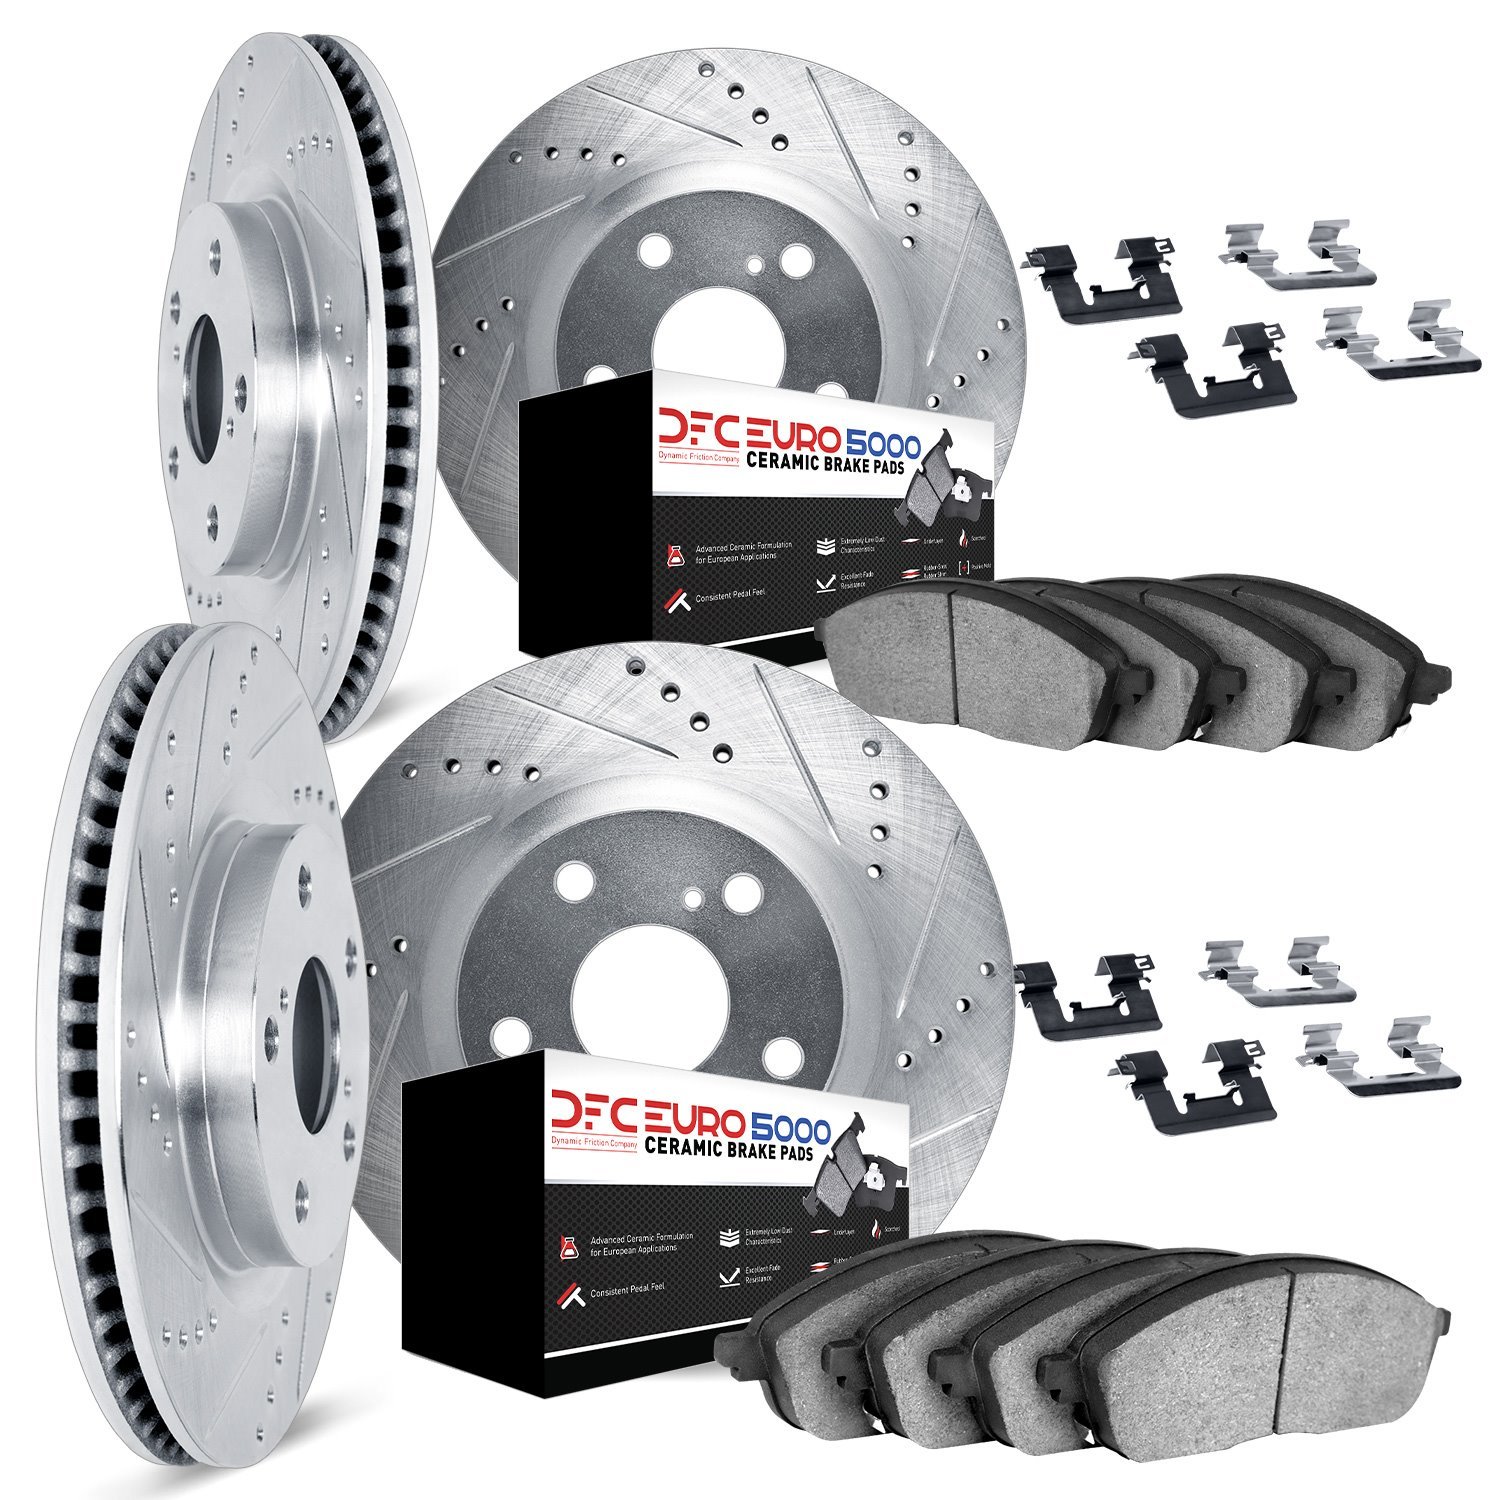 7614-31036 Drilled/Slotted Brake Rotors w/5000 Euro Ceramic Brake Pads Kit & Hardware [Silver], 2011-2018 BMW, Position: Front a